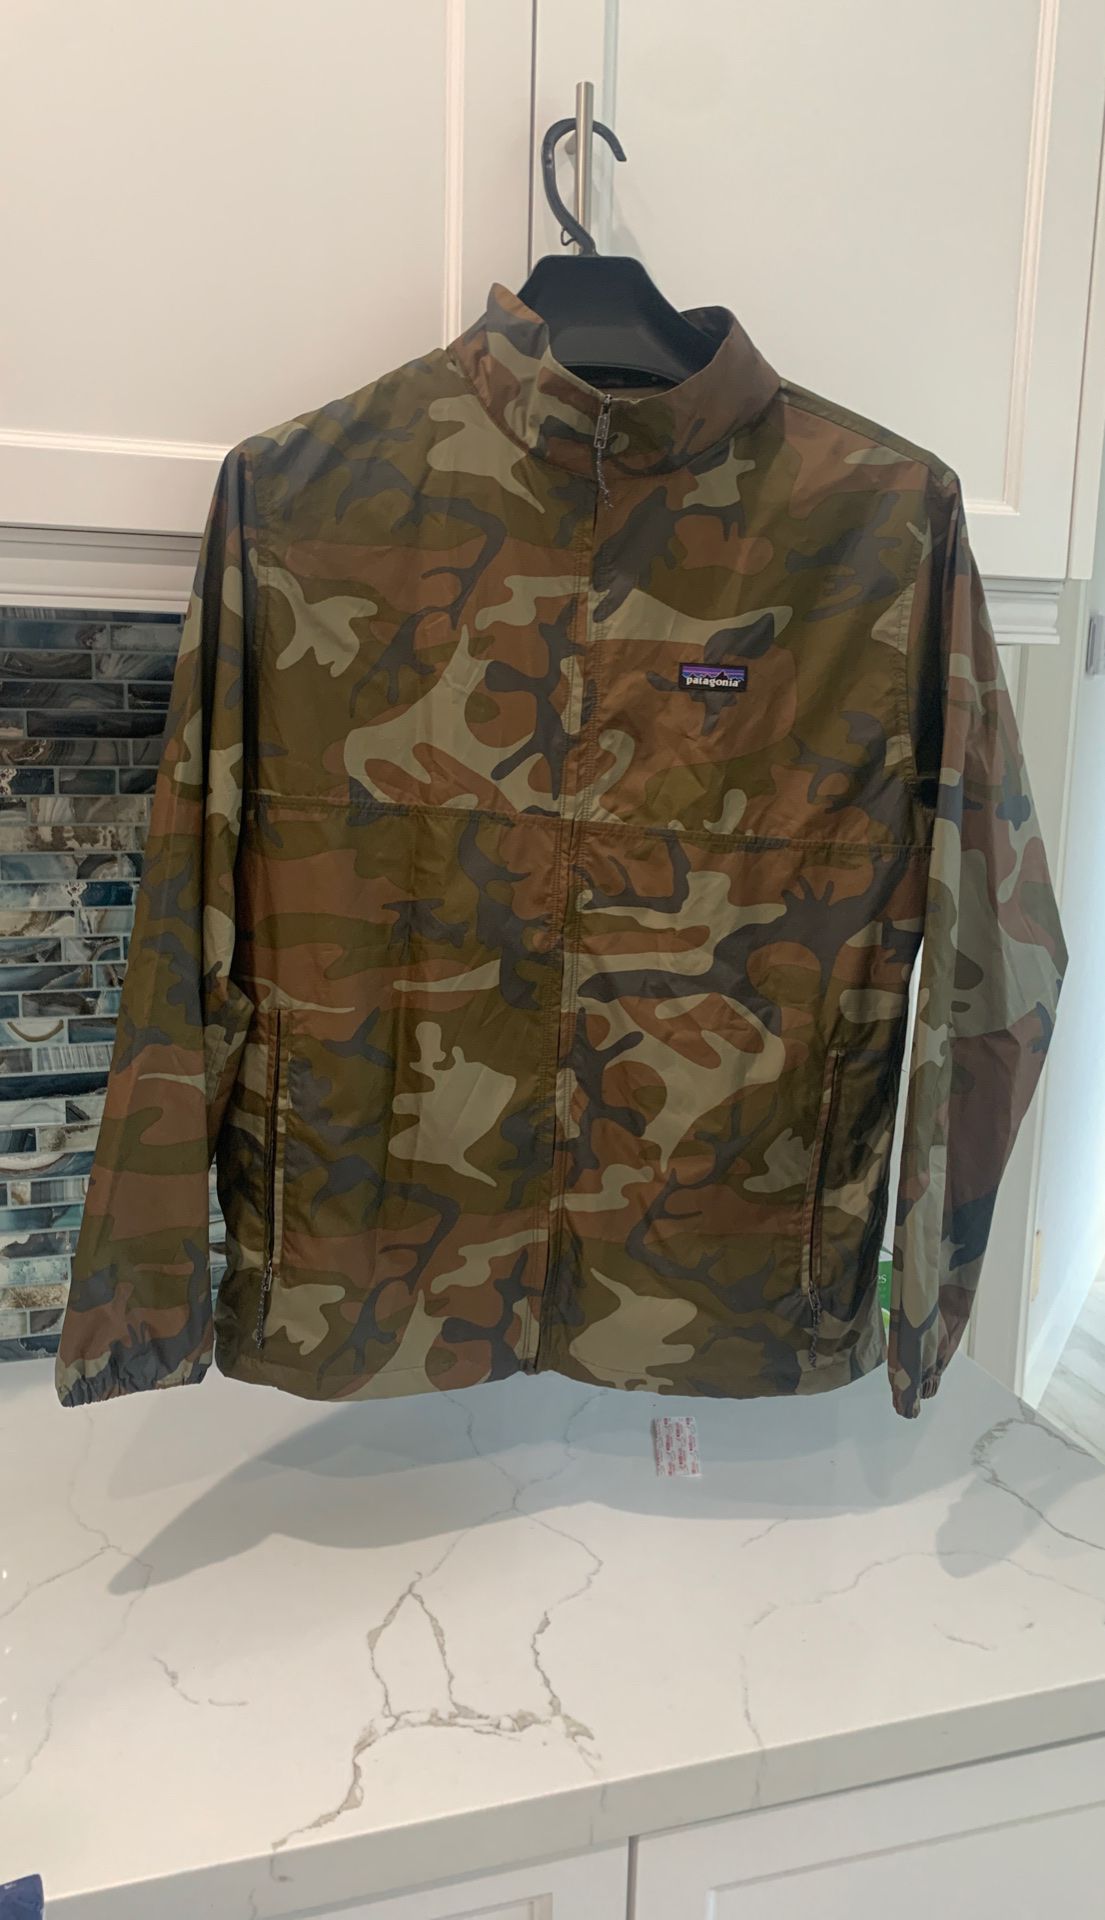 Patagonia camo light and variable jacket. Not available retail